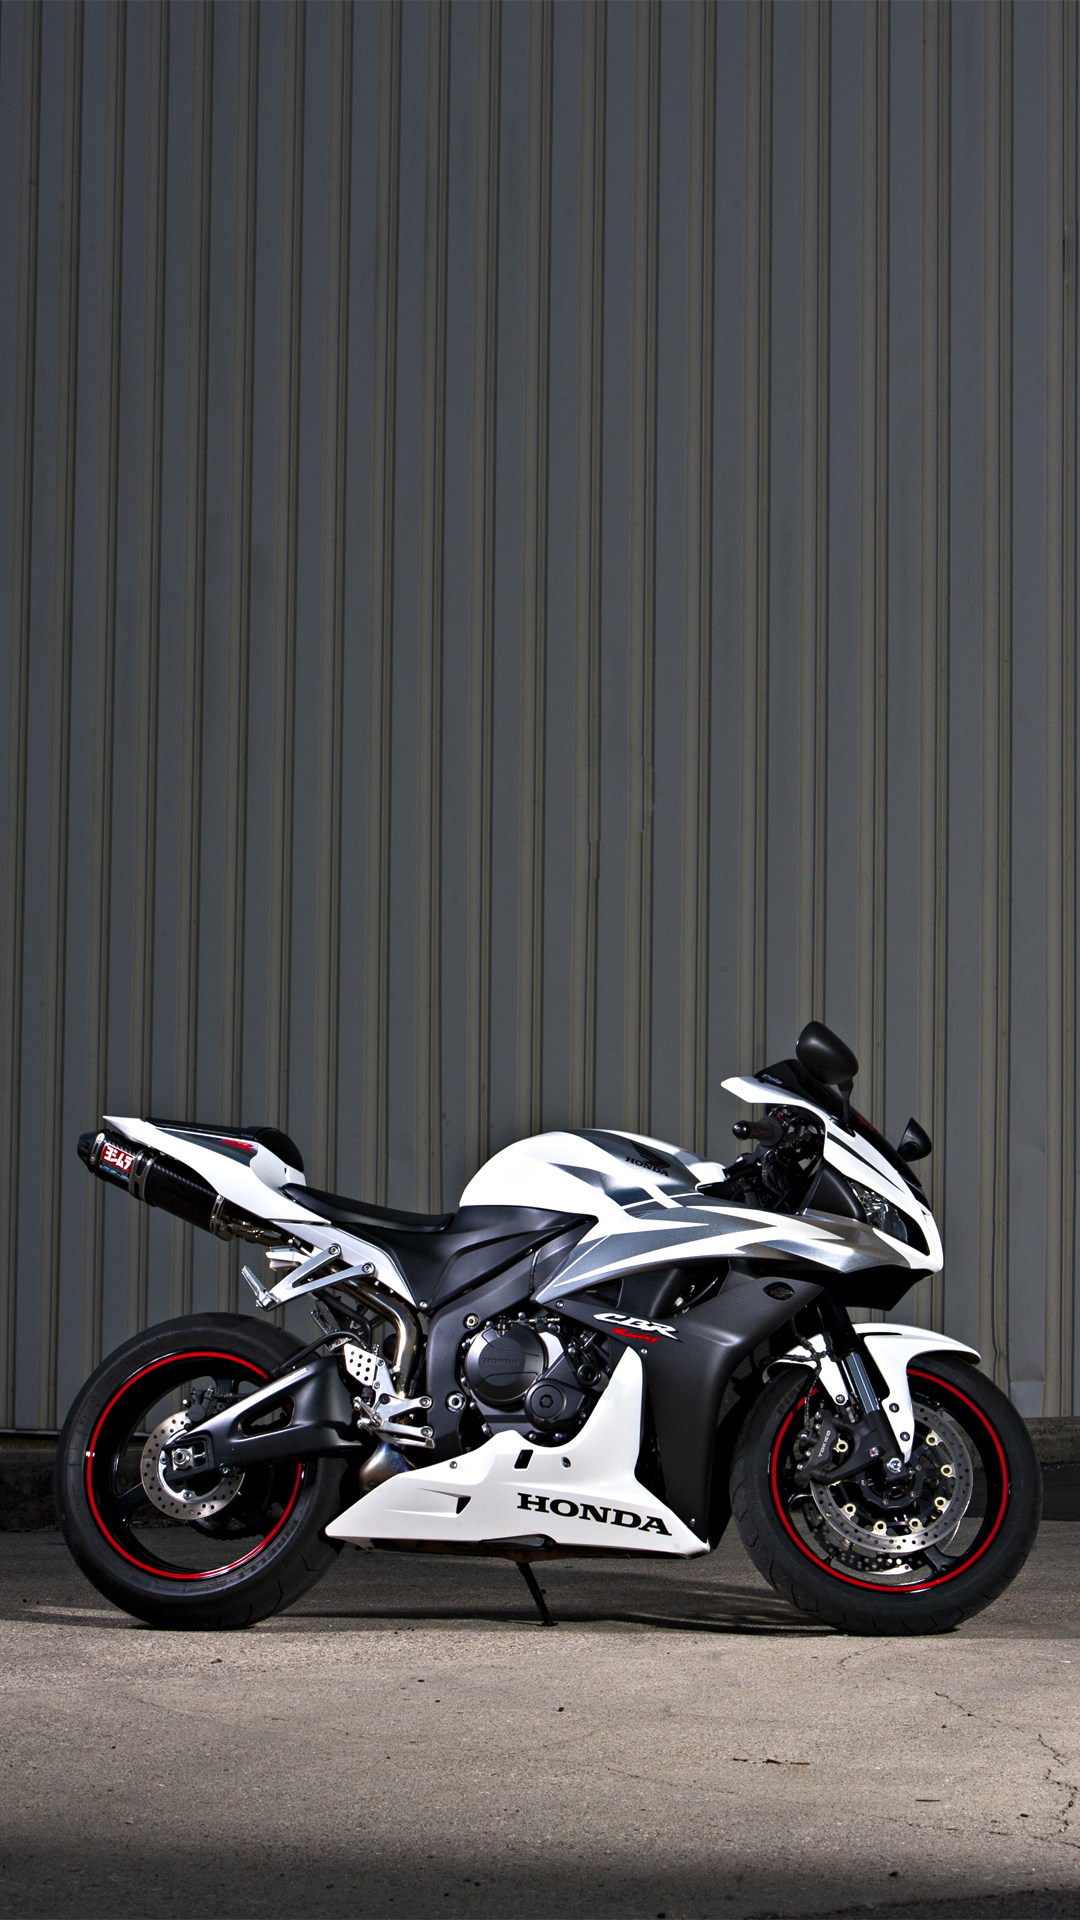 Free Download Honda Cbr Best Htc One Wallpapers And Easy To Images, Photos, Reviews